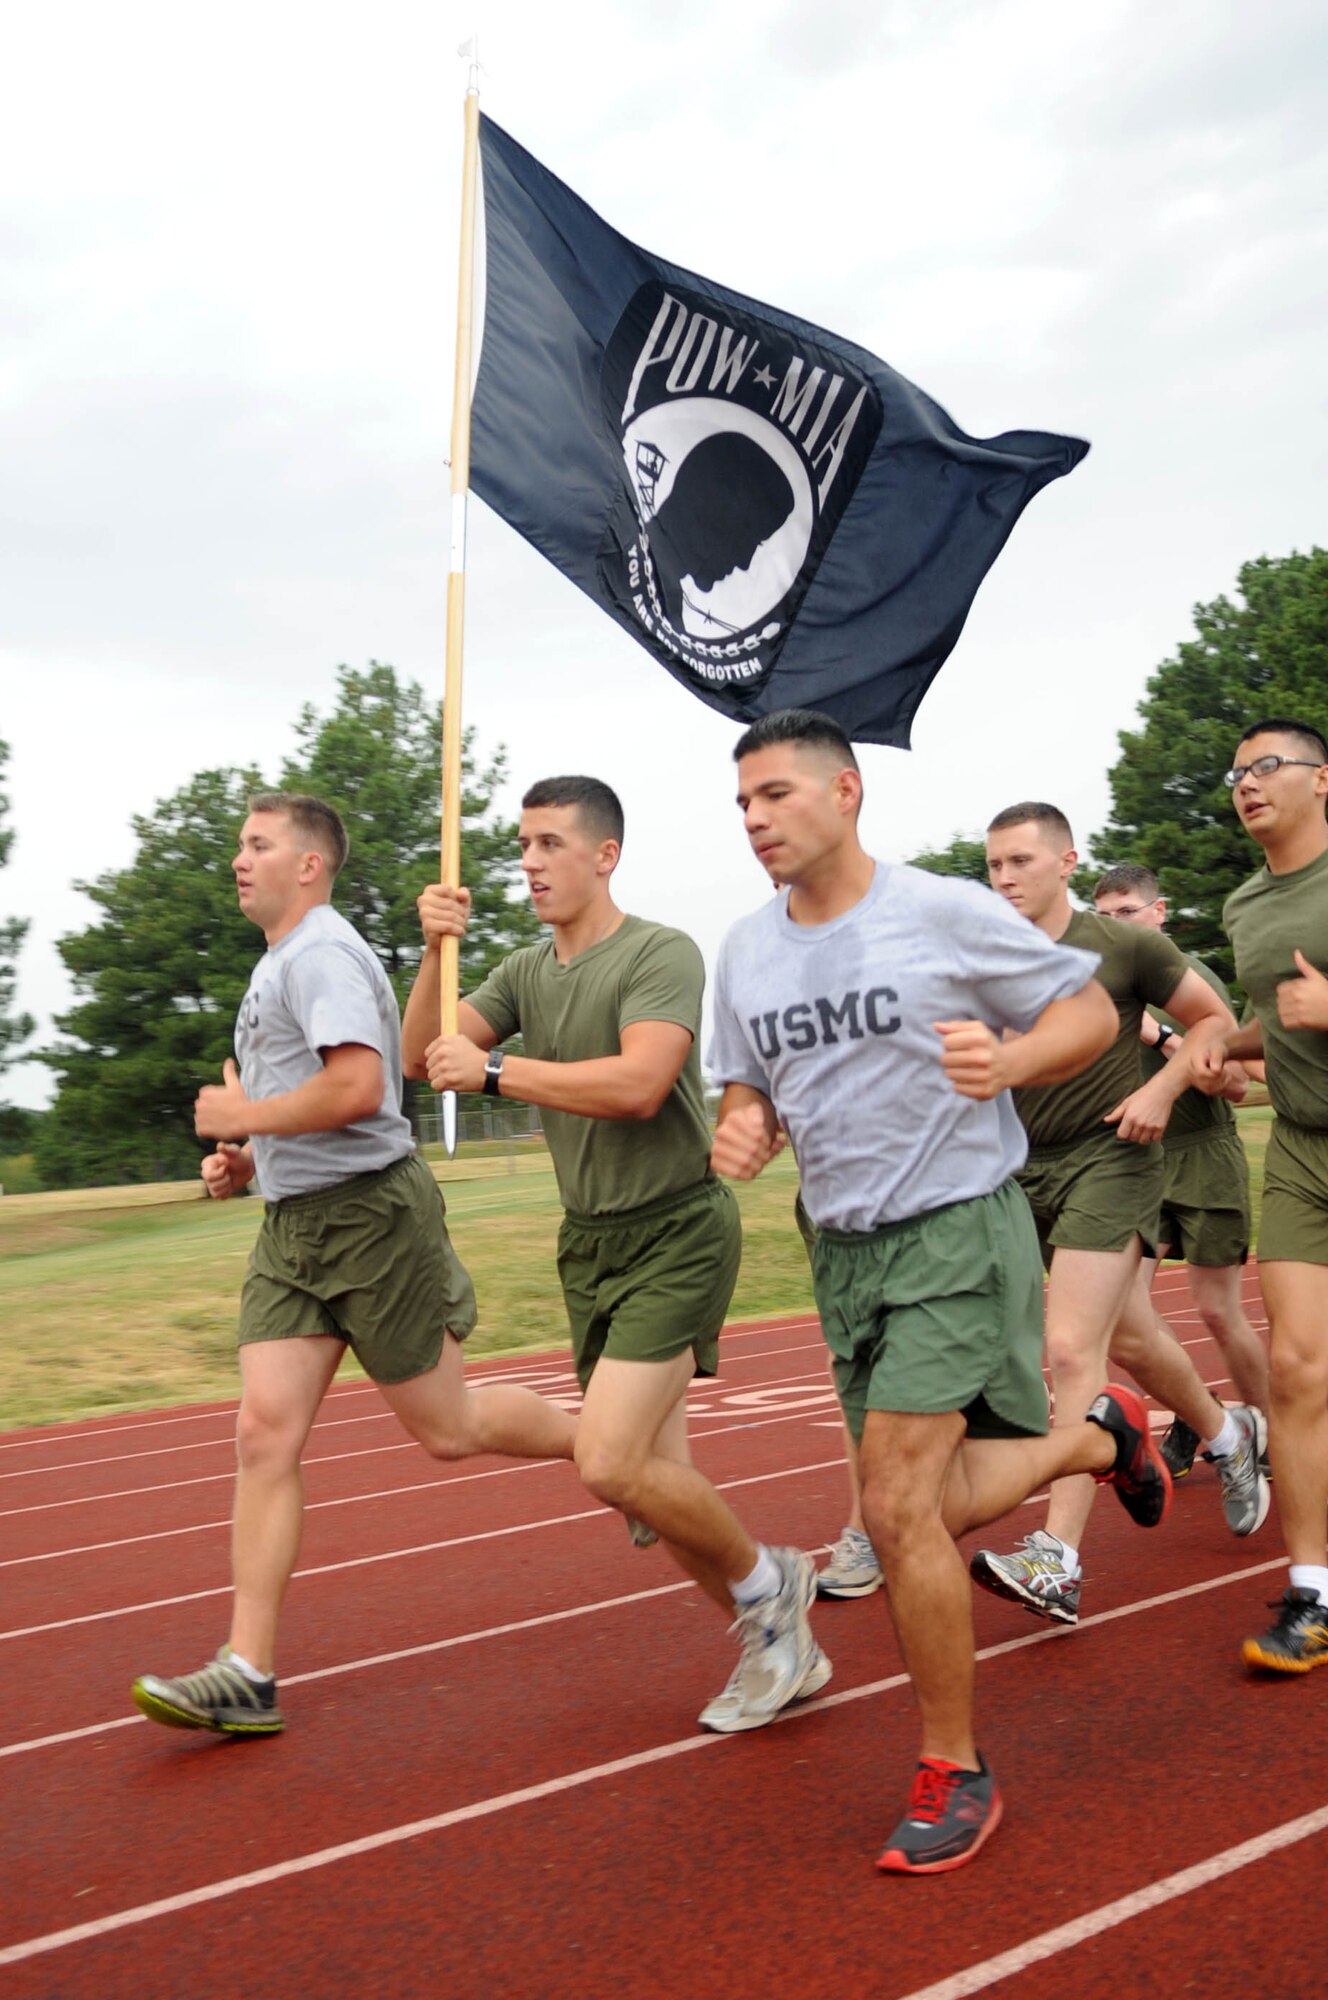 Marines from the Center for Aviation Technical Training run the final stretch of the National Prisoner of War/Missing in Action Remembrance run Sept. 16, 2011 at Little Rock Air Force Base, Ark. The run aimed to support and show appreciation to all the sacrifrices POWs endured and those MIA still endure. (U.S. Air Force photo by Staff Sgt. Jim Araos)